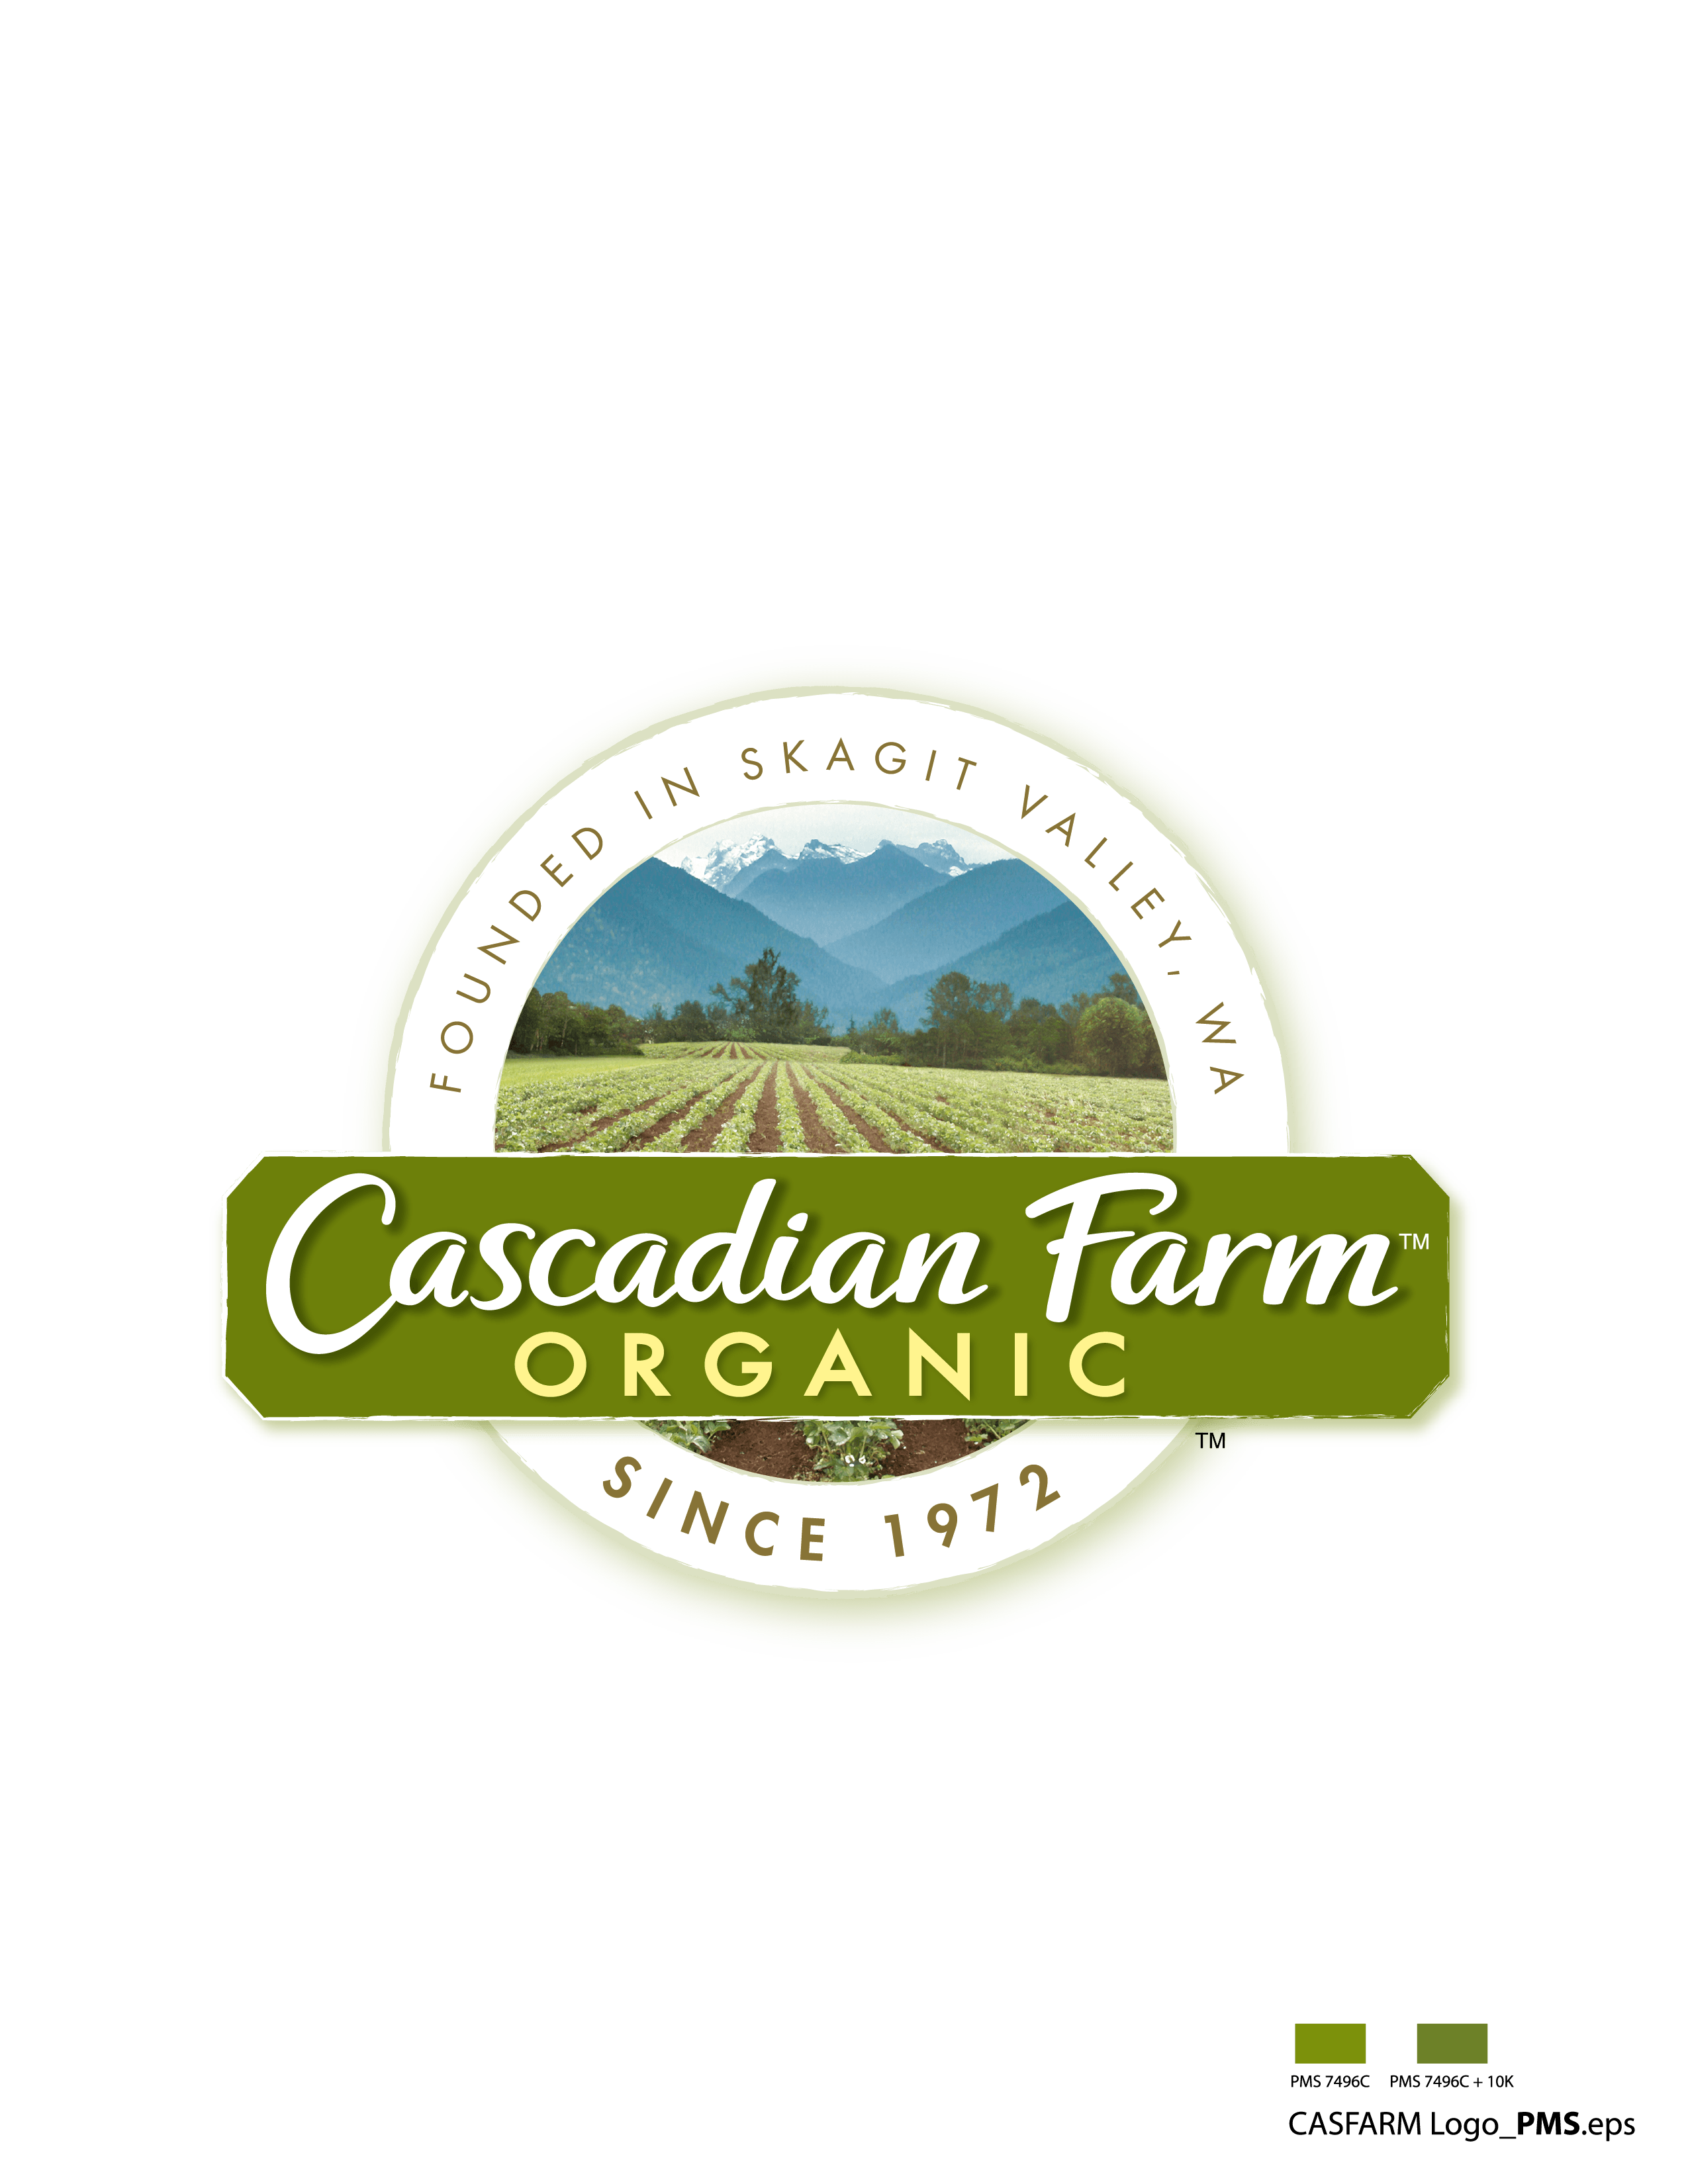 Cascadian Farms Logo - Cascadian Farm Invests in Kernza® Perennial Grain with Promising ...